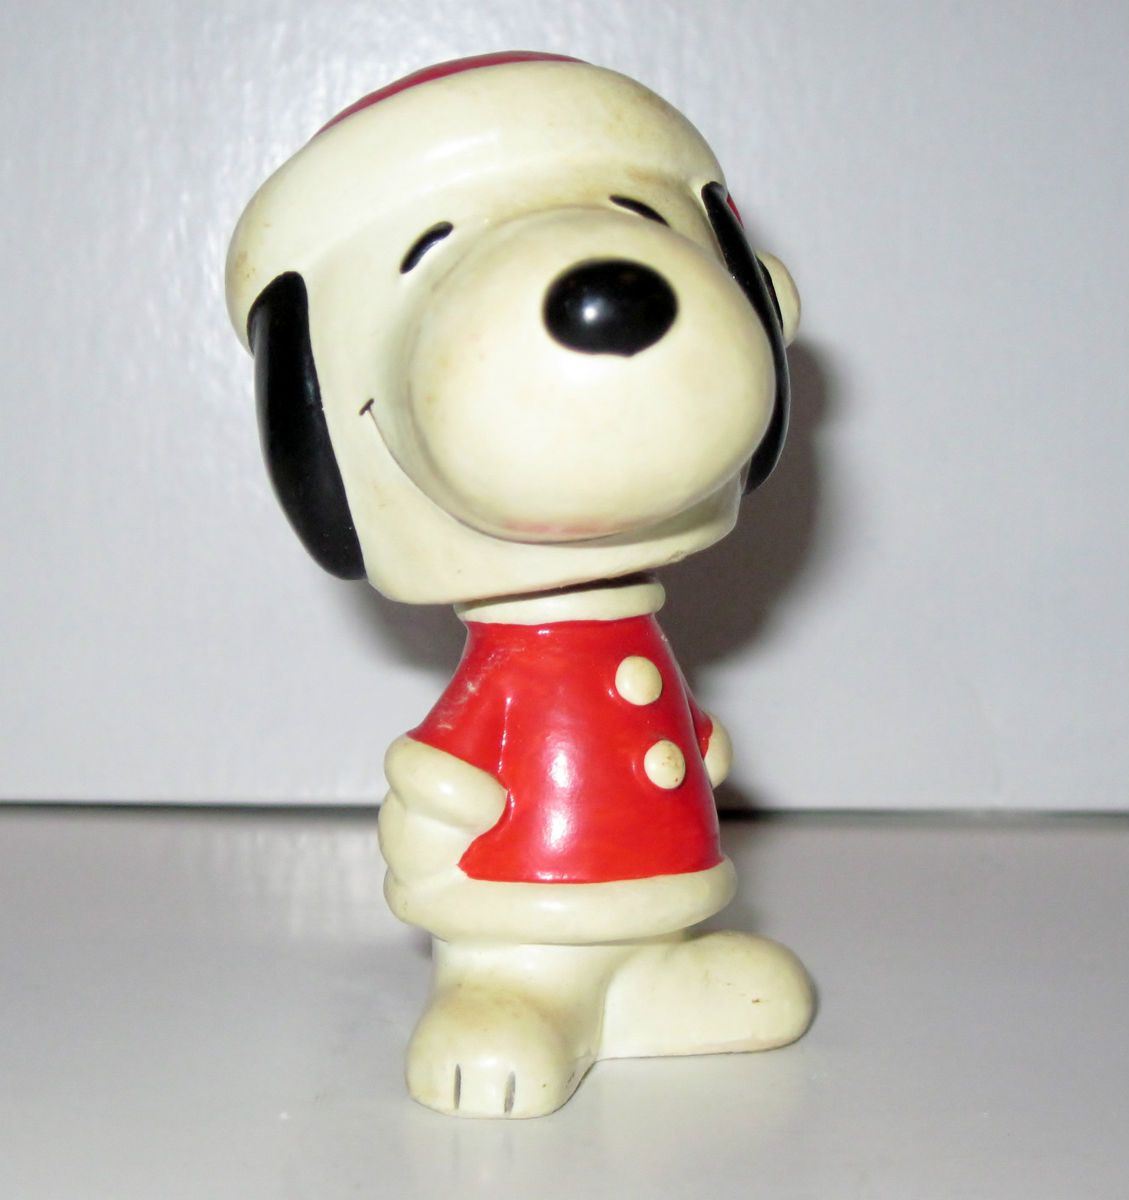  Hand Painted Snoopy Bobble Head Santa RARE Collectible Figurine